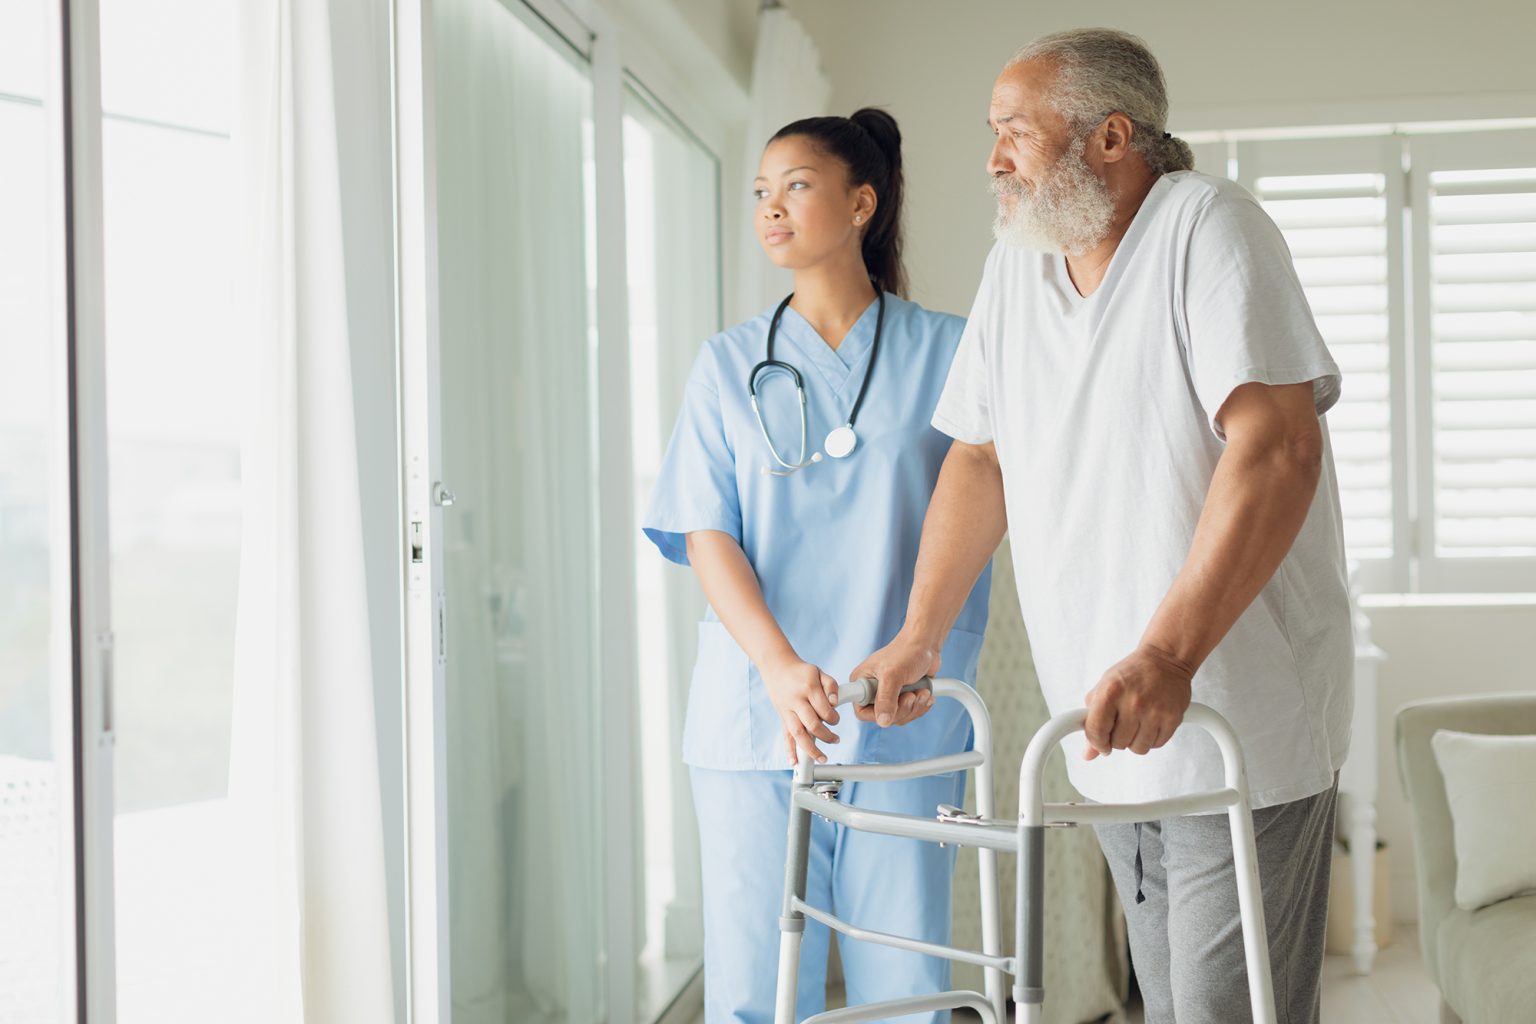 Healthcare worker with man using walking support